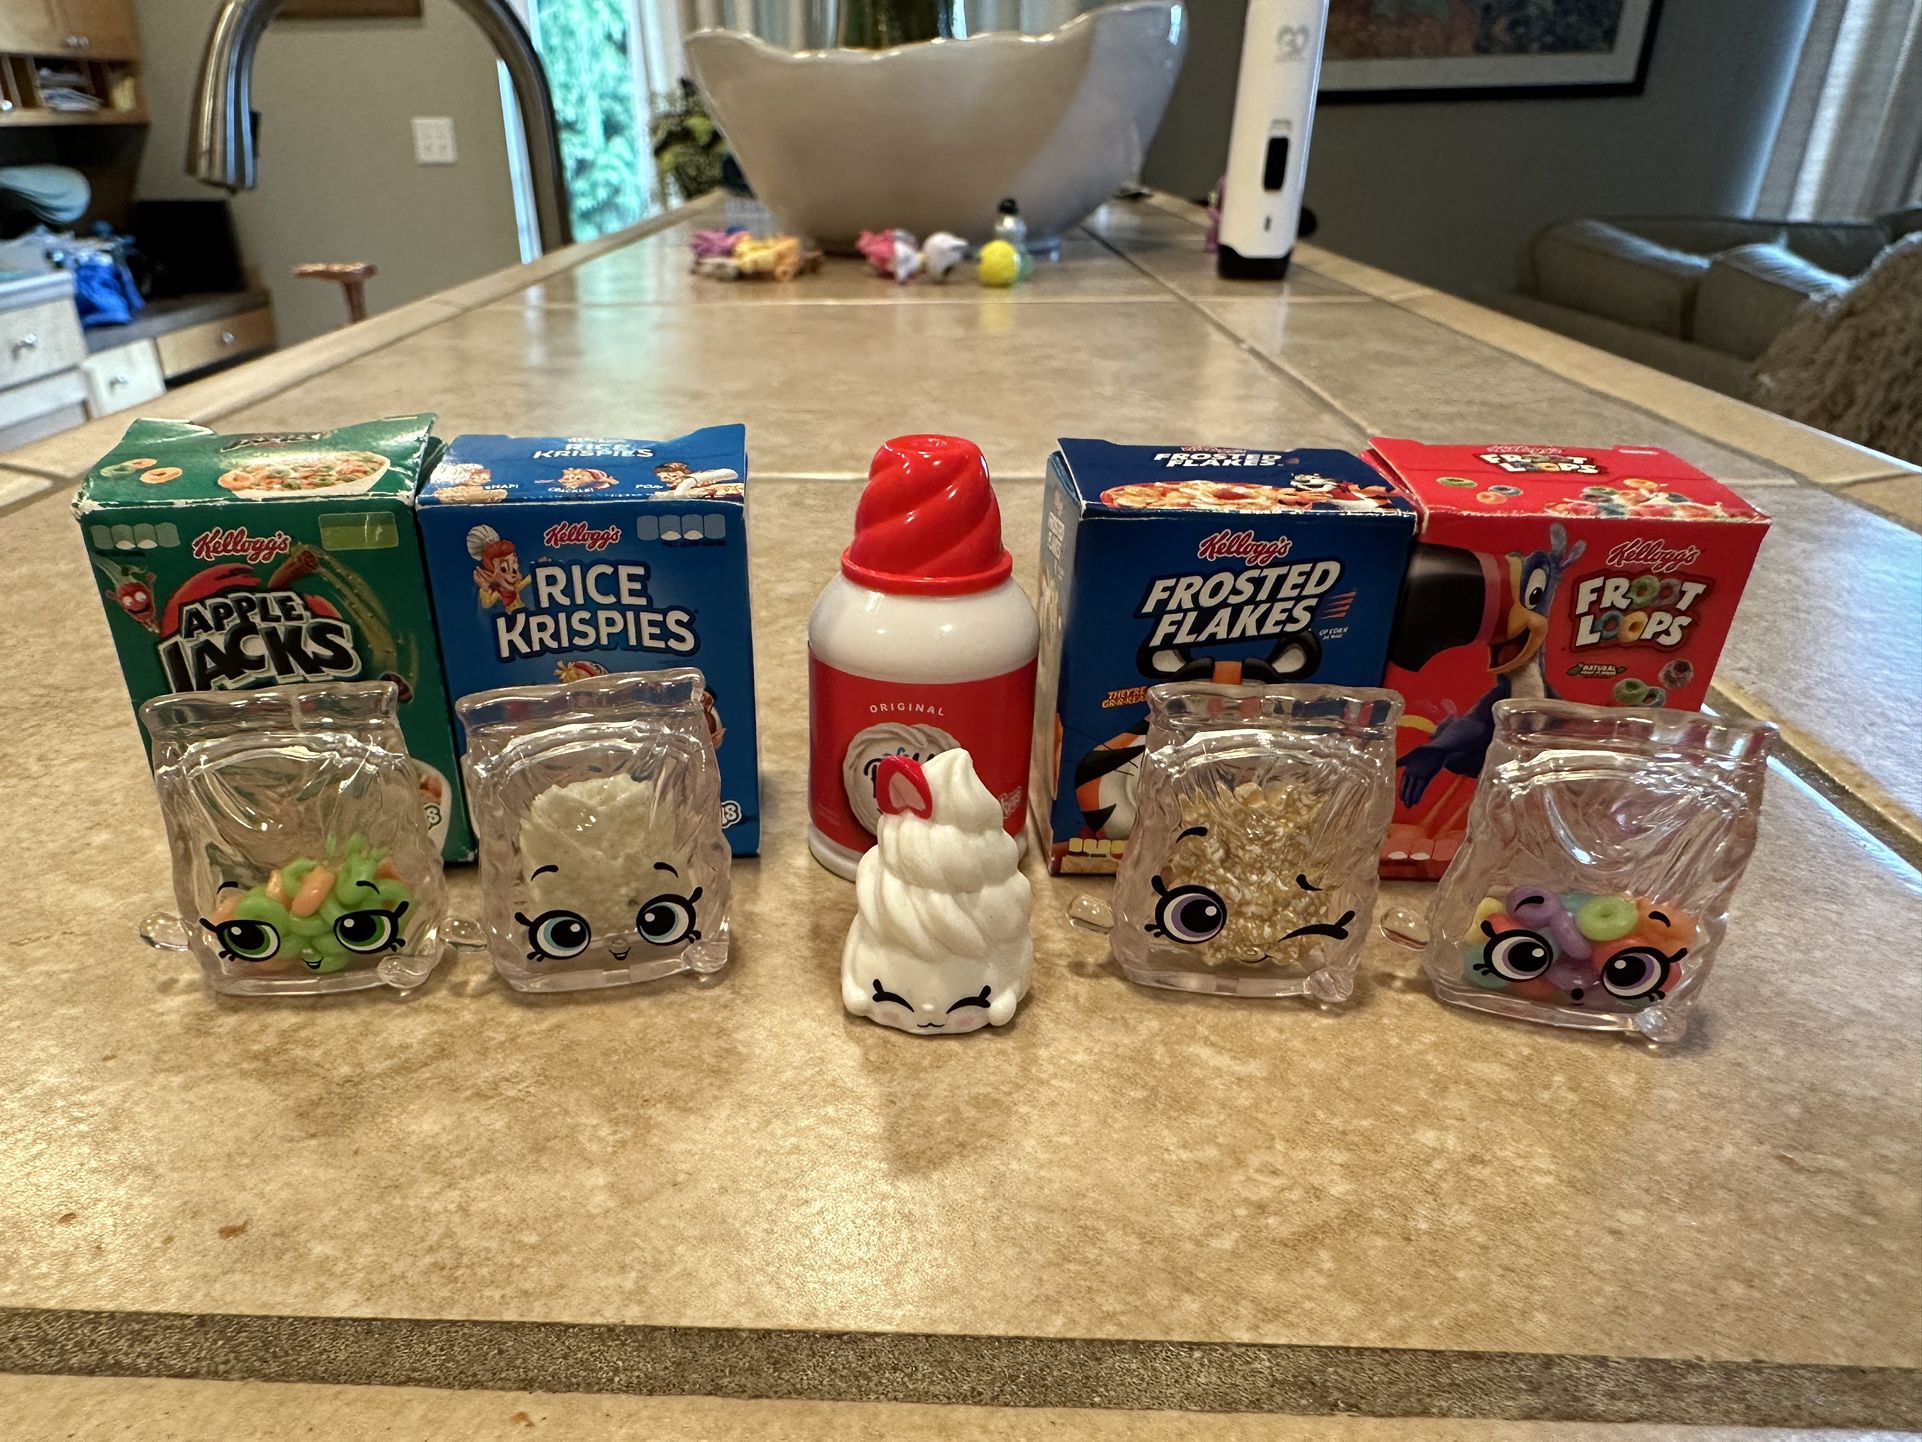 Shopkins real littles (Cereal And Reddi Wip).